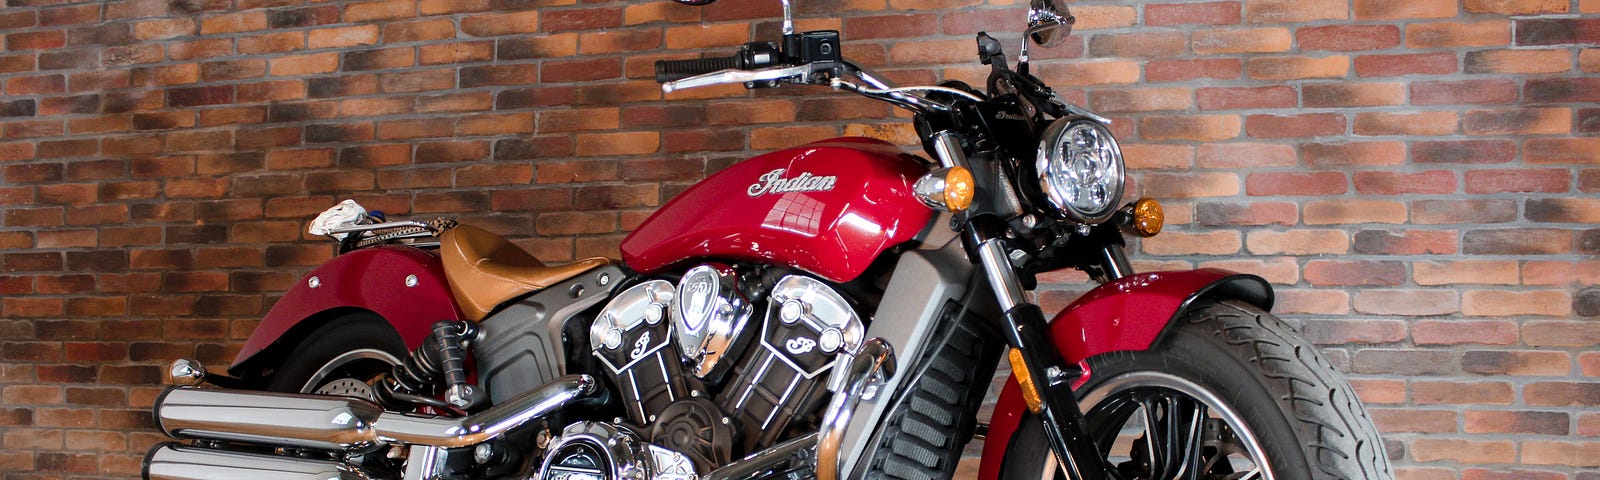 Red Indian Scout motorcycle.